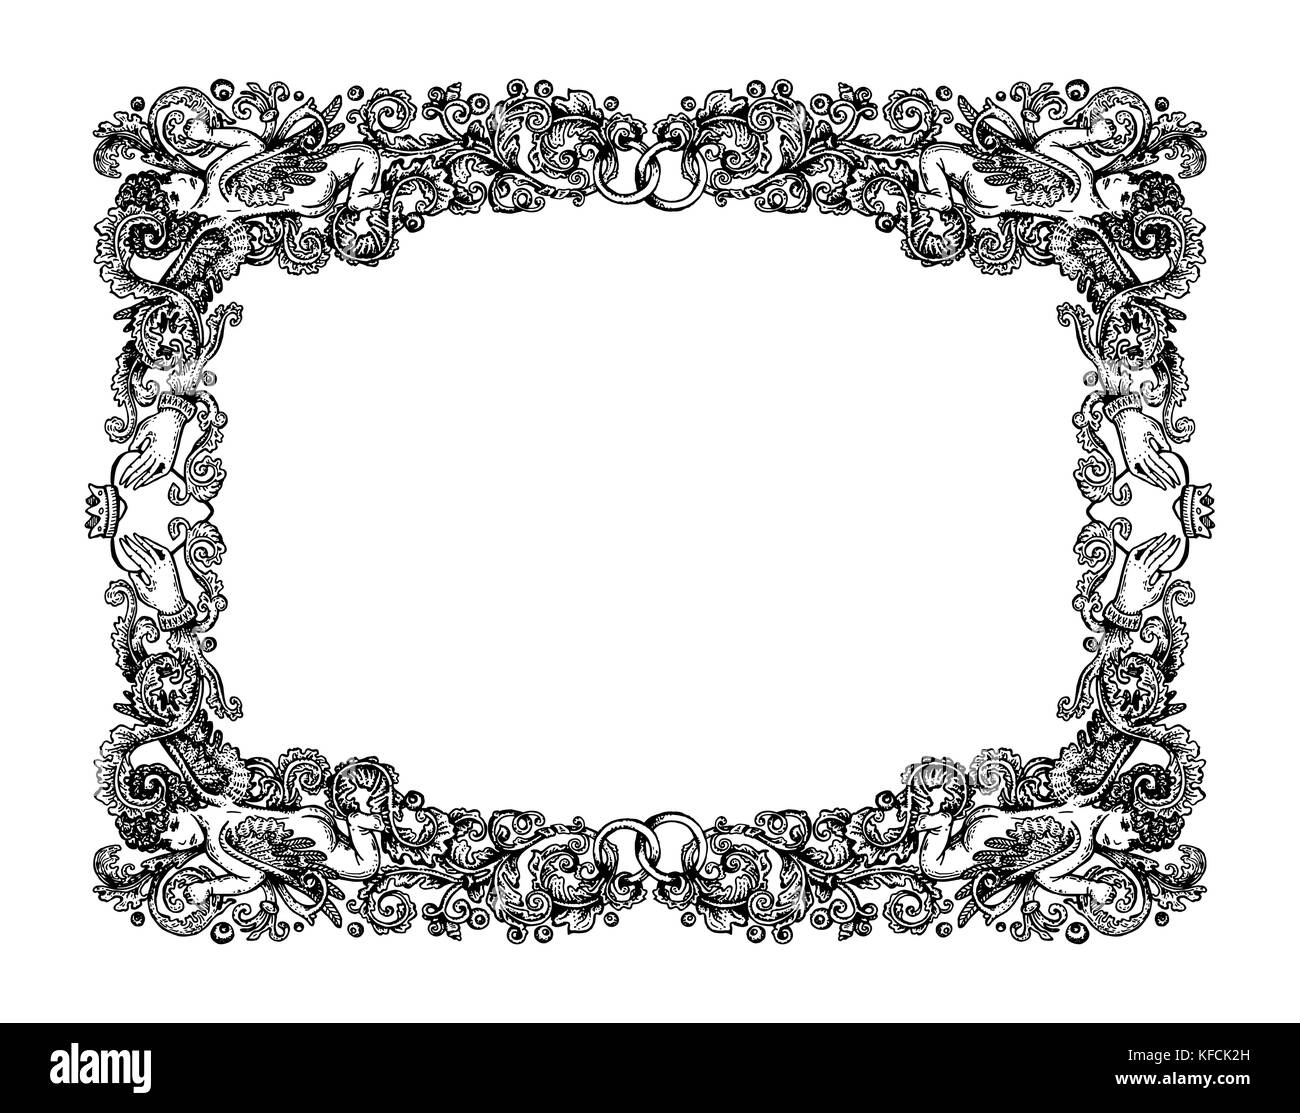 Vector illustration of vintage wedding vignette frame - renaissance engraving style hand drawn ornament frame with cupids, claddah symbol with hands a Stock Vector